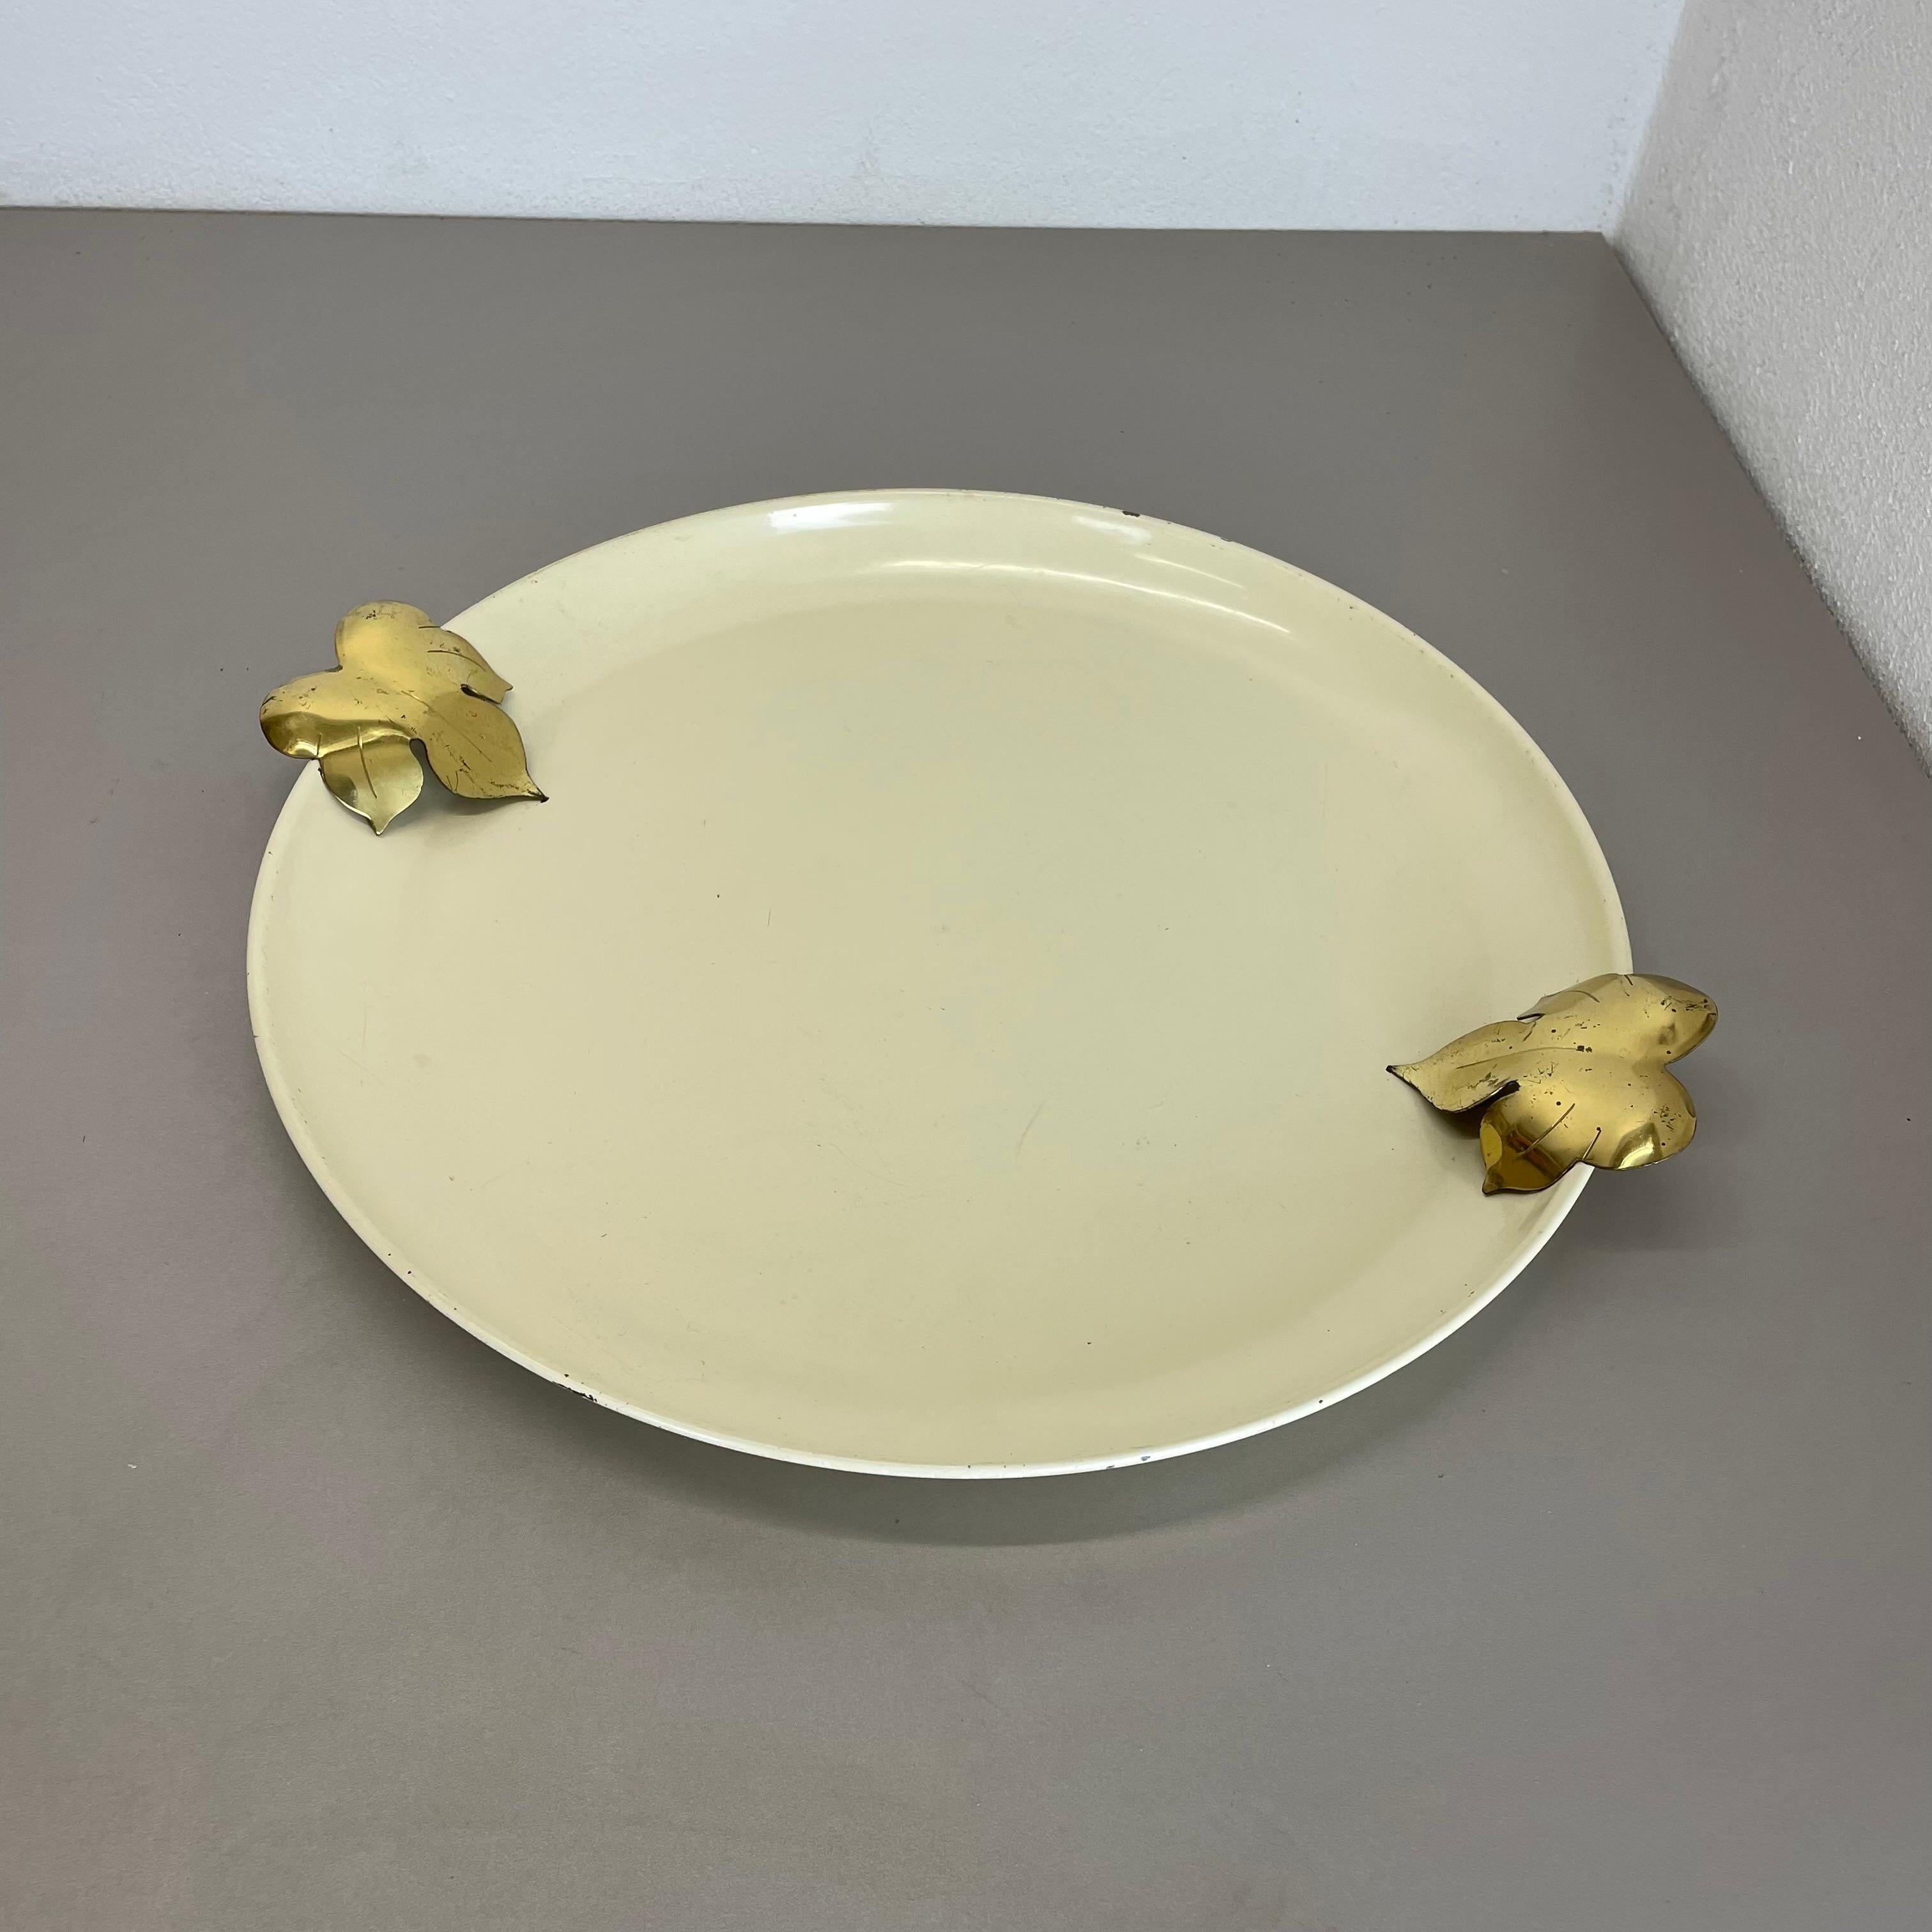 Article:

Tray element with brass leaf handles


Producer:

Vereinigte Werkstätten München


Origin:

Germany


Material:

metal and brass


Decade:

1950s


Description:

This original midcentury tray element was produced in the 1950s in Germany by